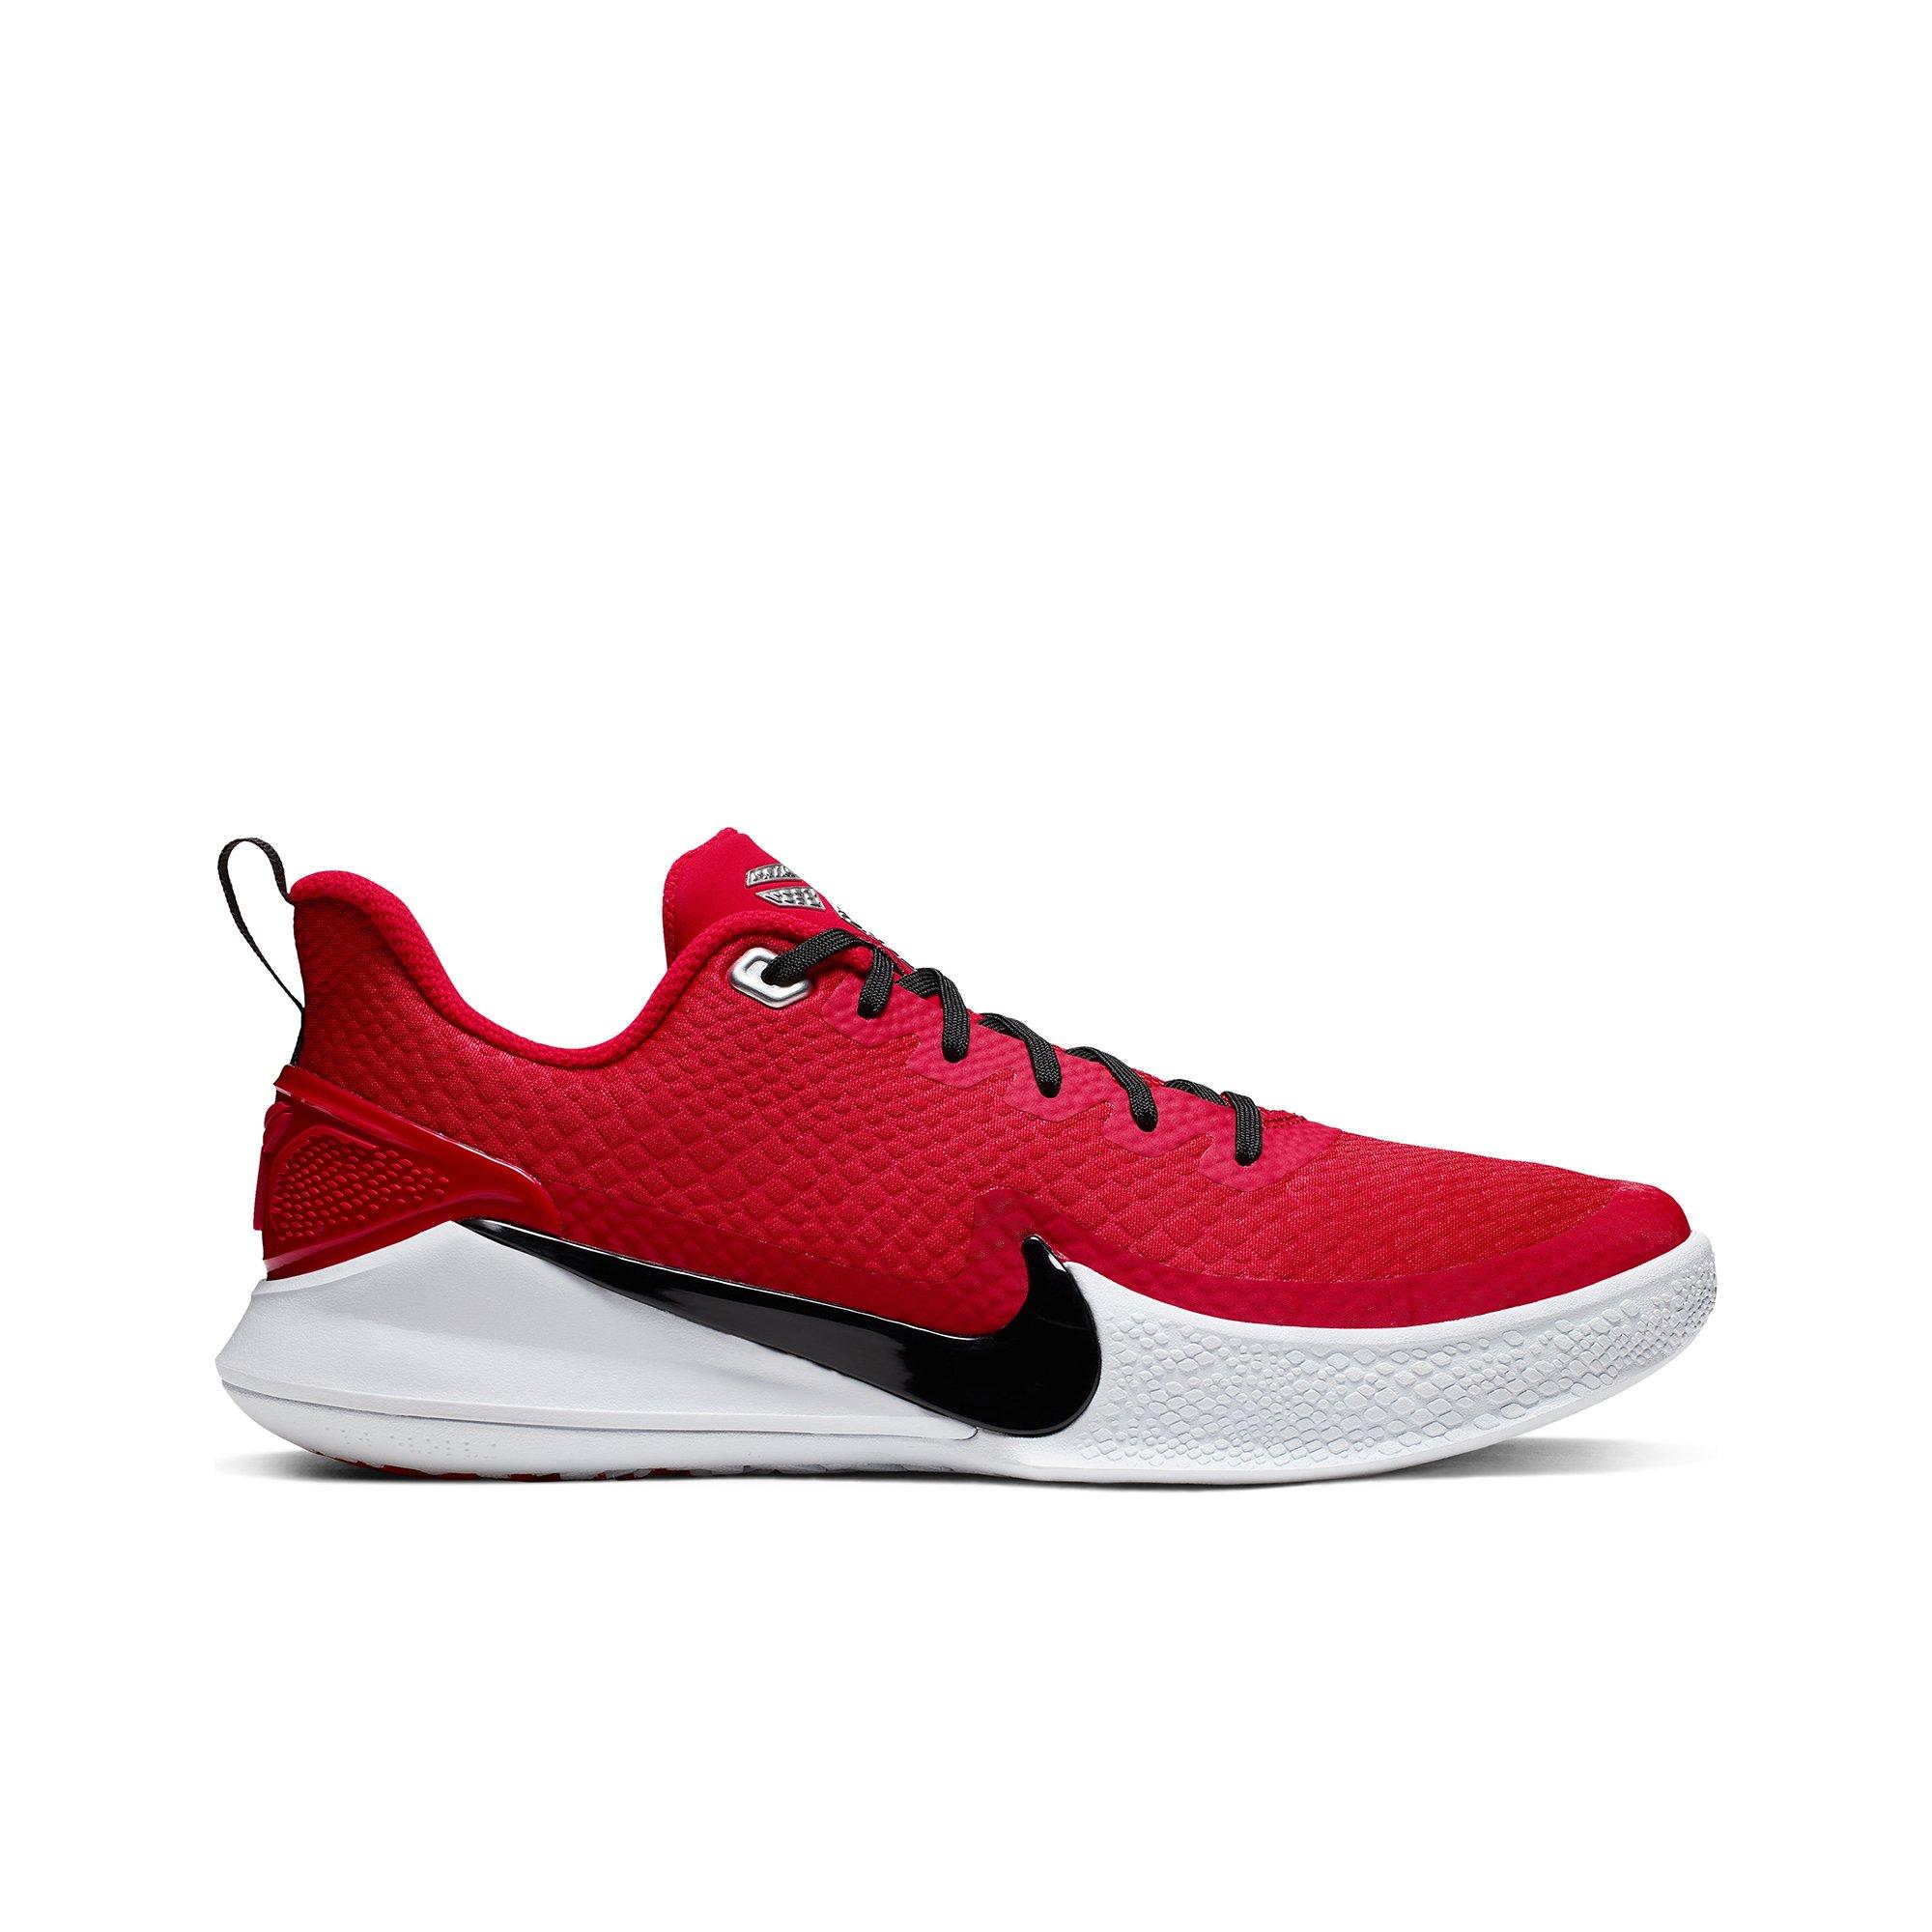 mamba shoes red